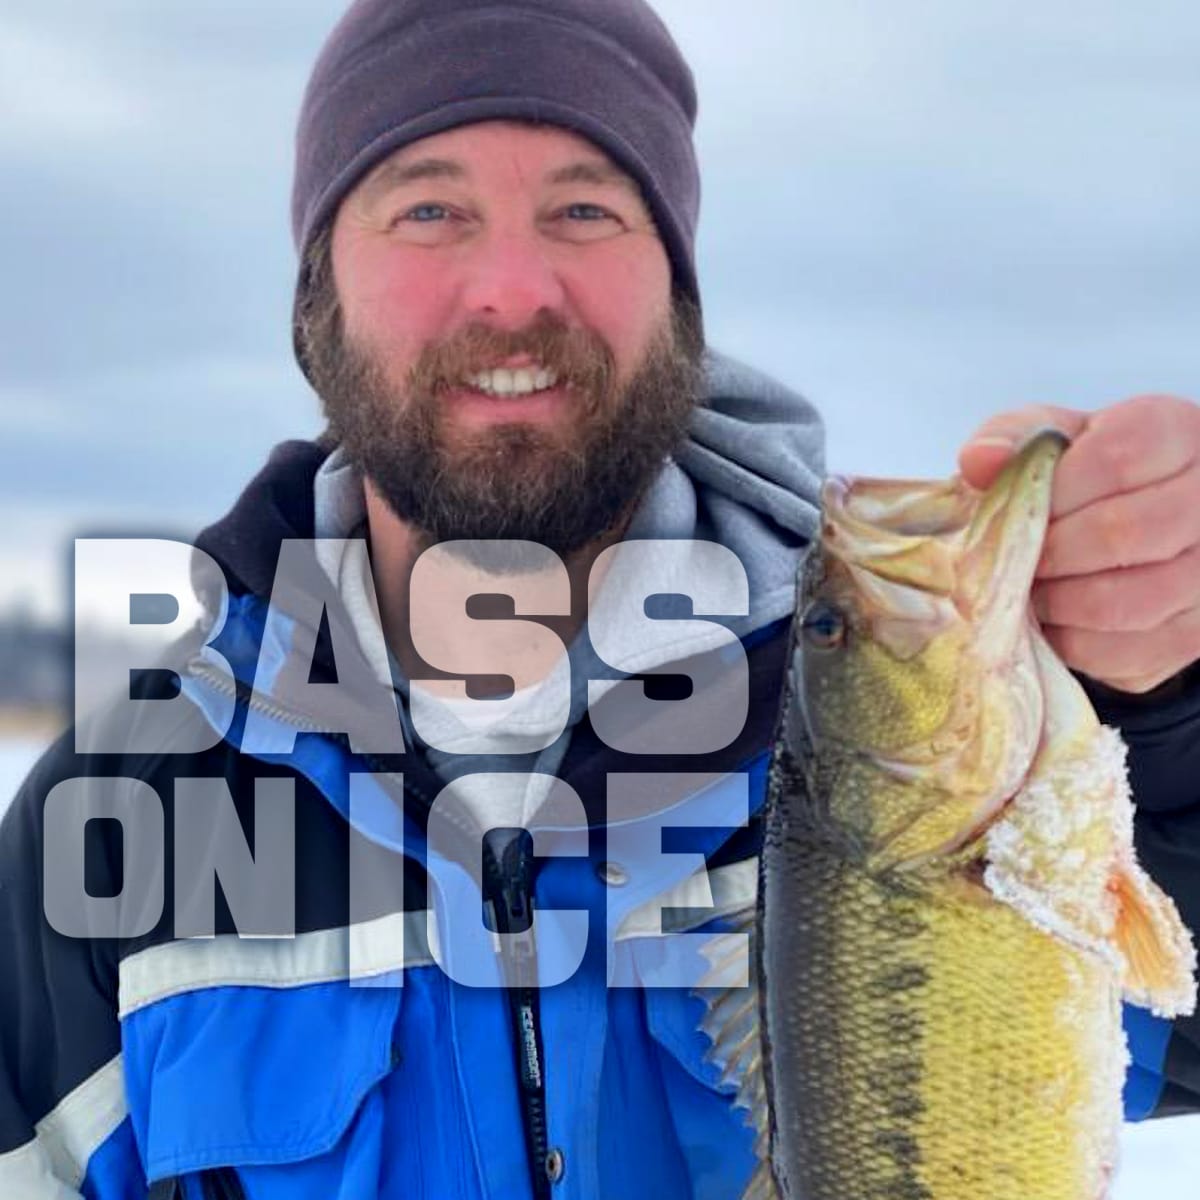 Can You Ice Fish For Bass? - Men's Journal